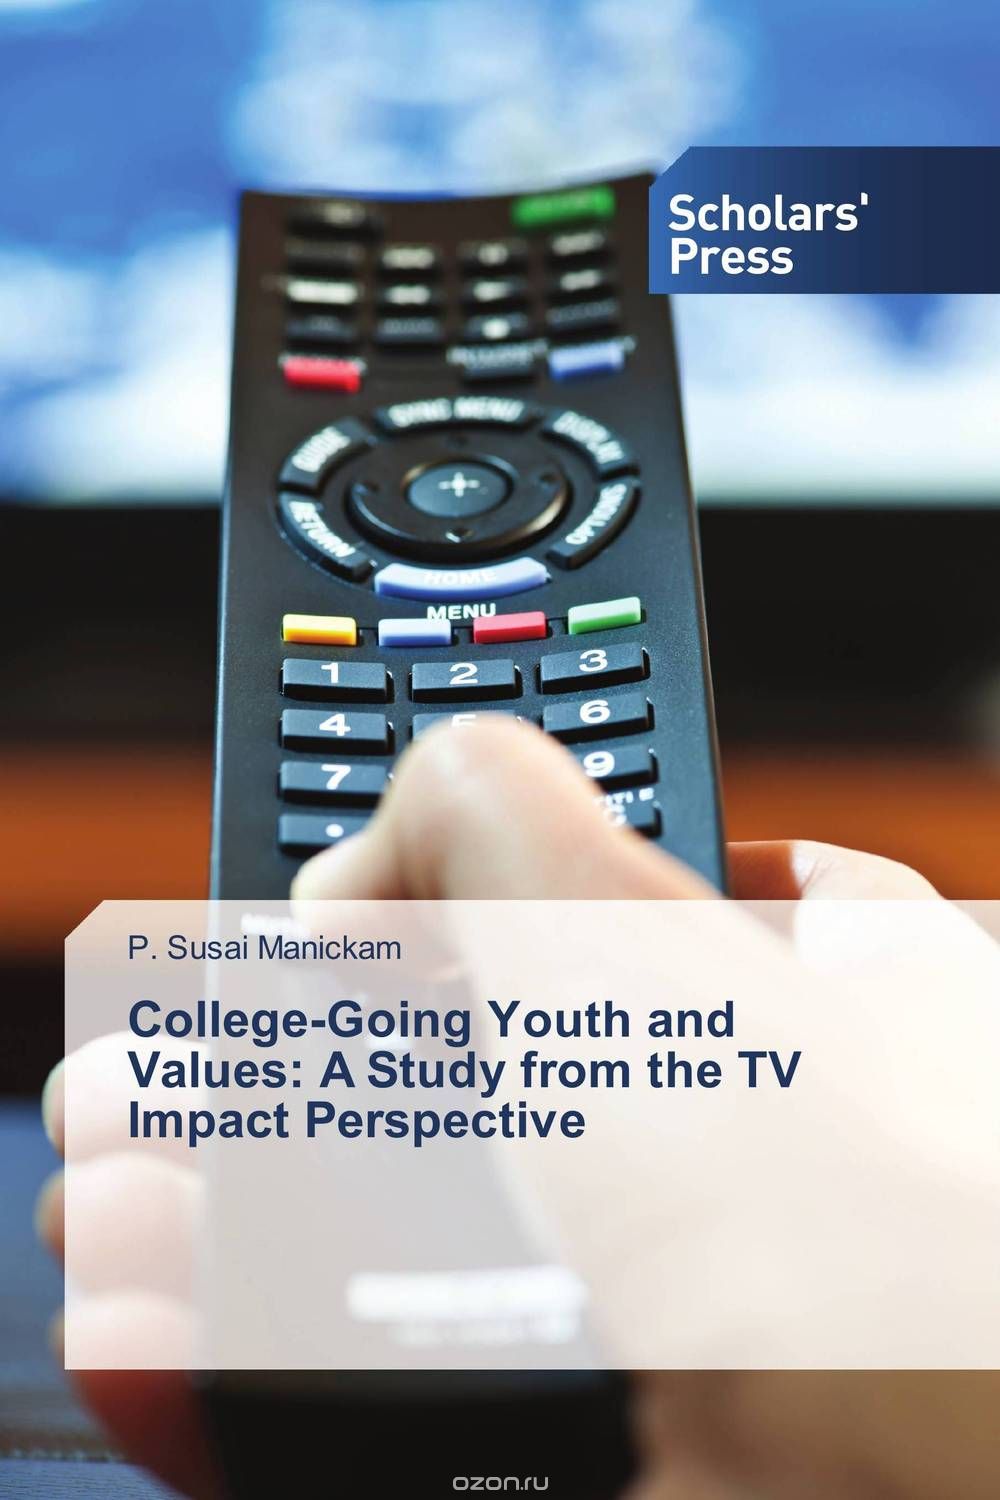 Скачать книгу "College-Going Youth and Values: A Study from the TV Impact Perspective"